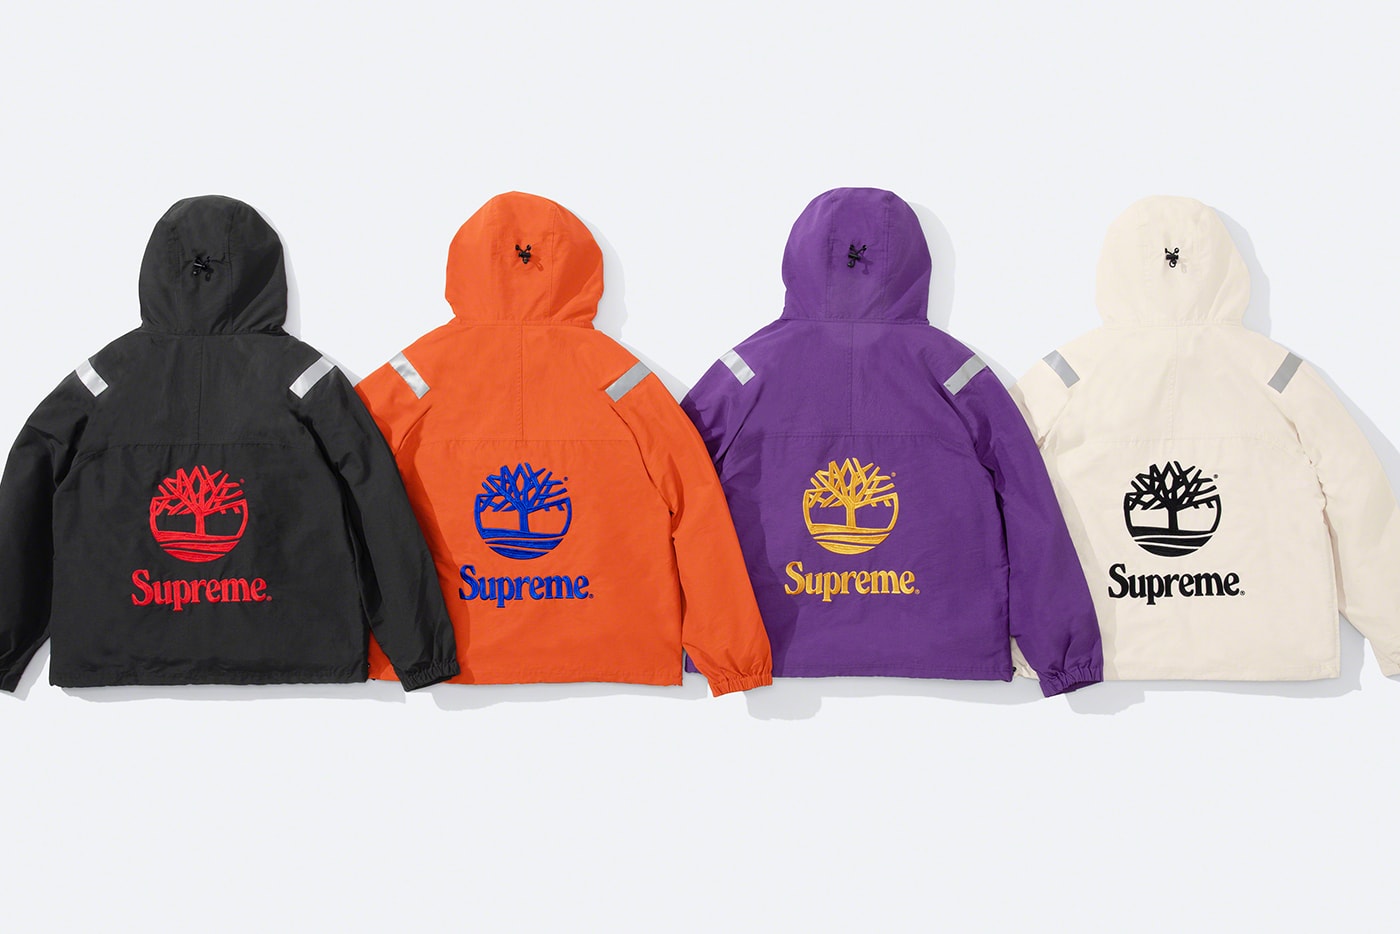 Supreme x Timberland Spring 2021 Collaboration | Hypebeast